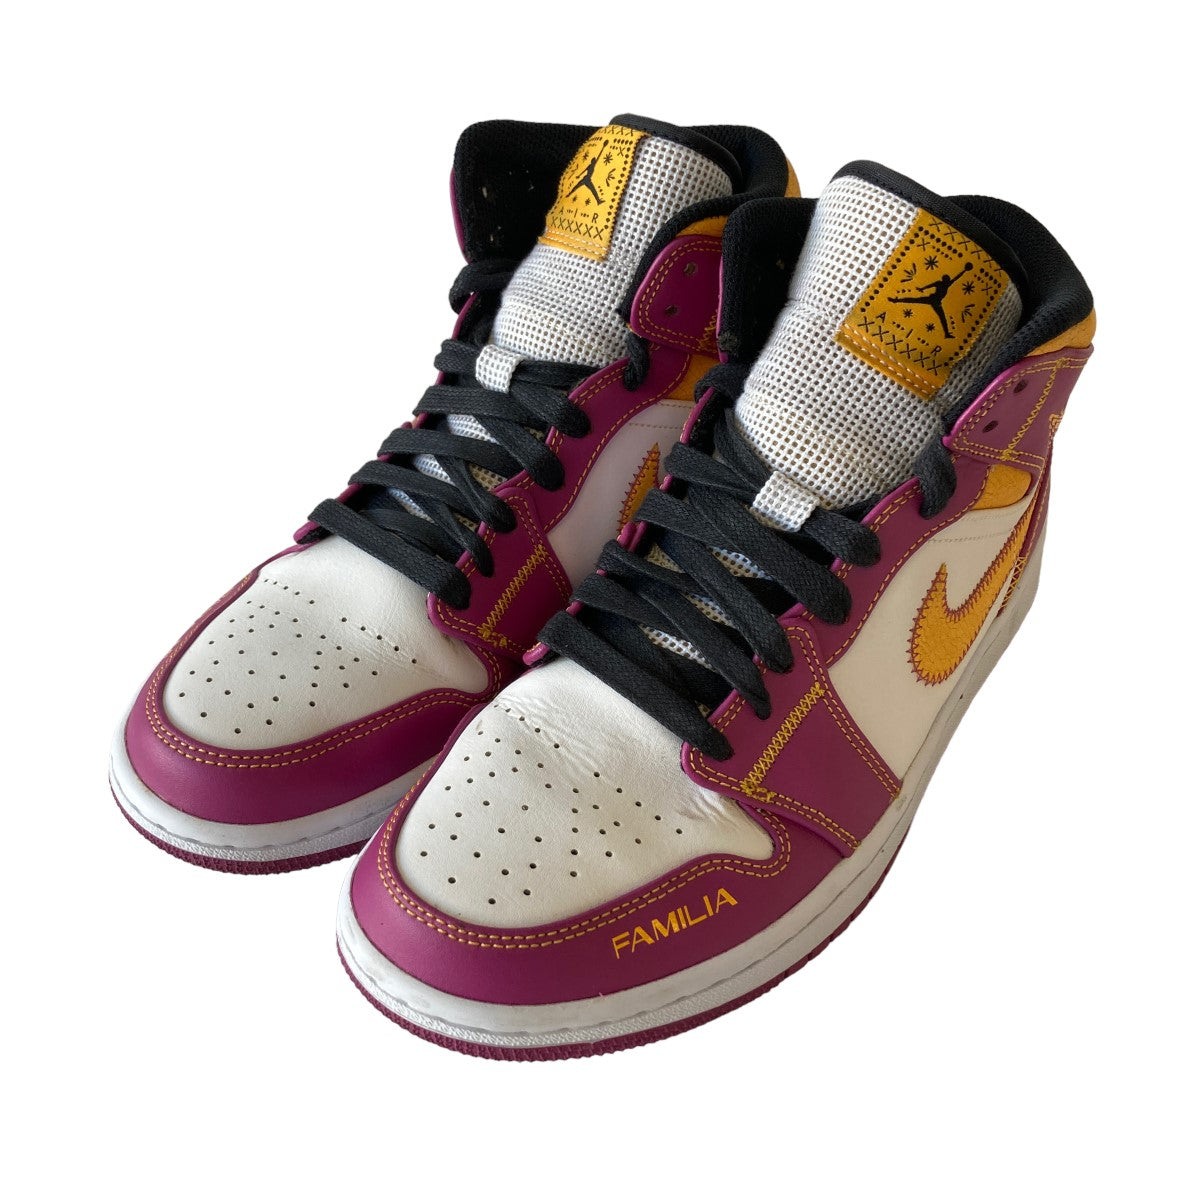 Nike Air Jordan 1 Mid Day of the dead死者の日